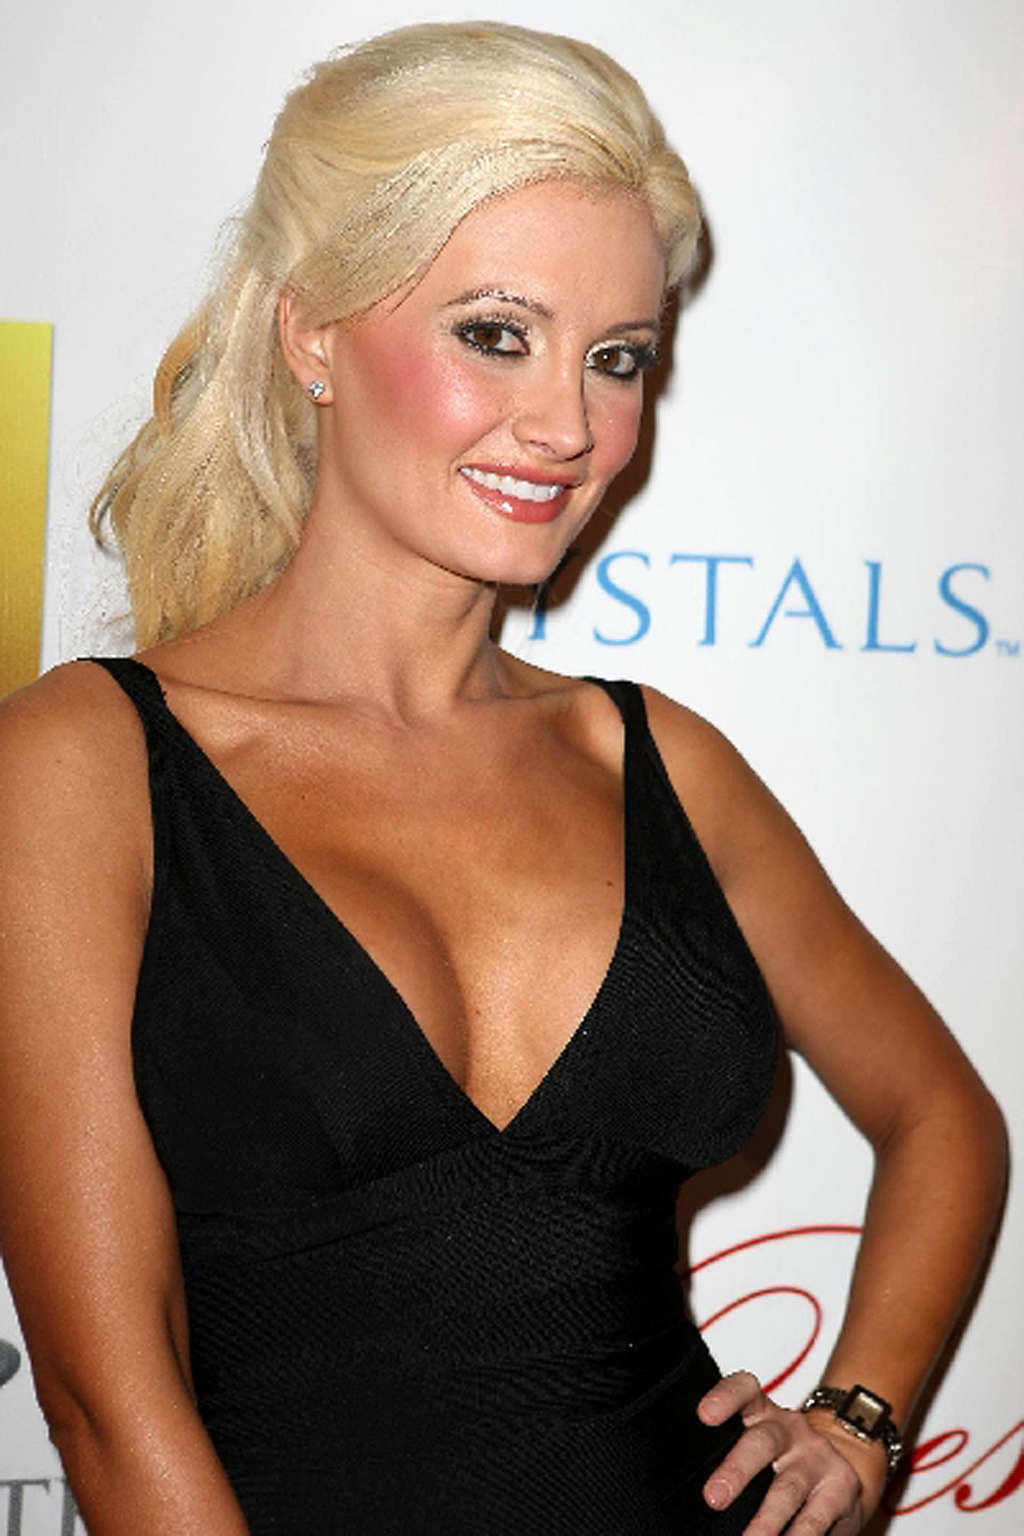 Holly Madison looking very hot and sexy in her evening dress #75371687